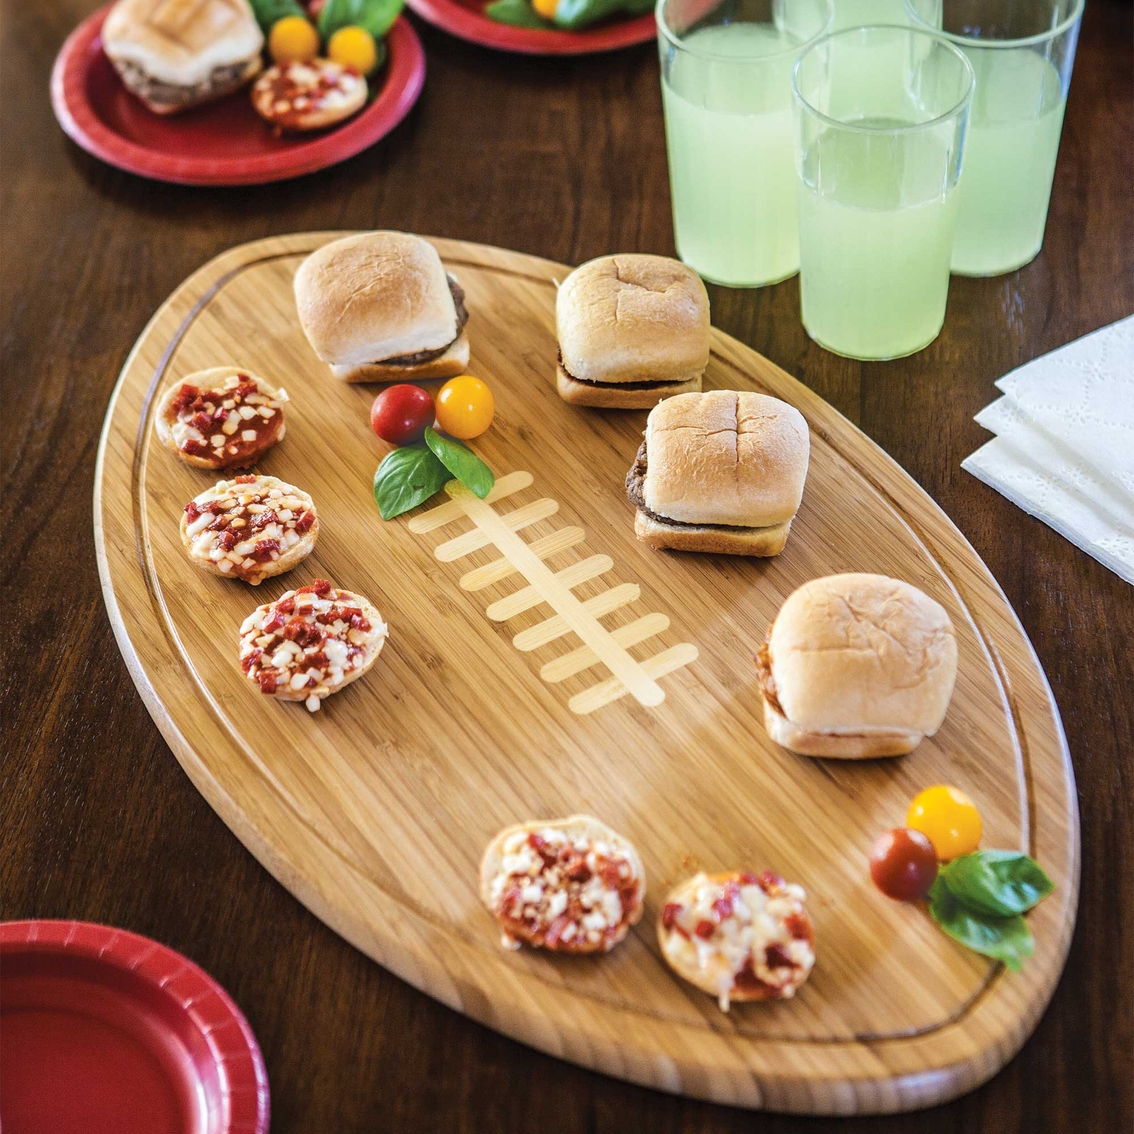 Picnic Time Kickoff Football Cutting Board and Serving Tray - Image 9 of 10